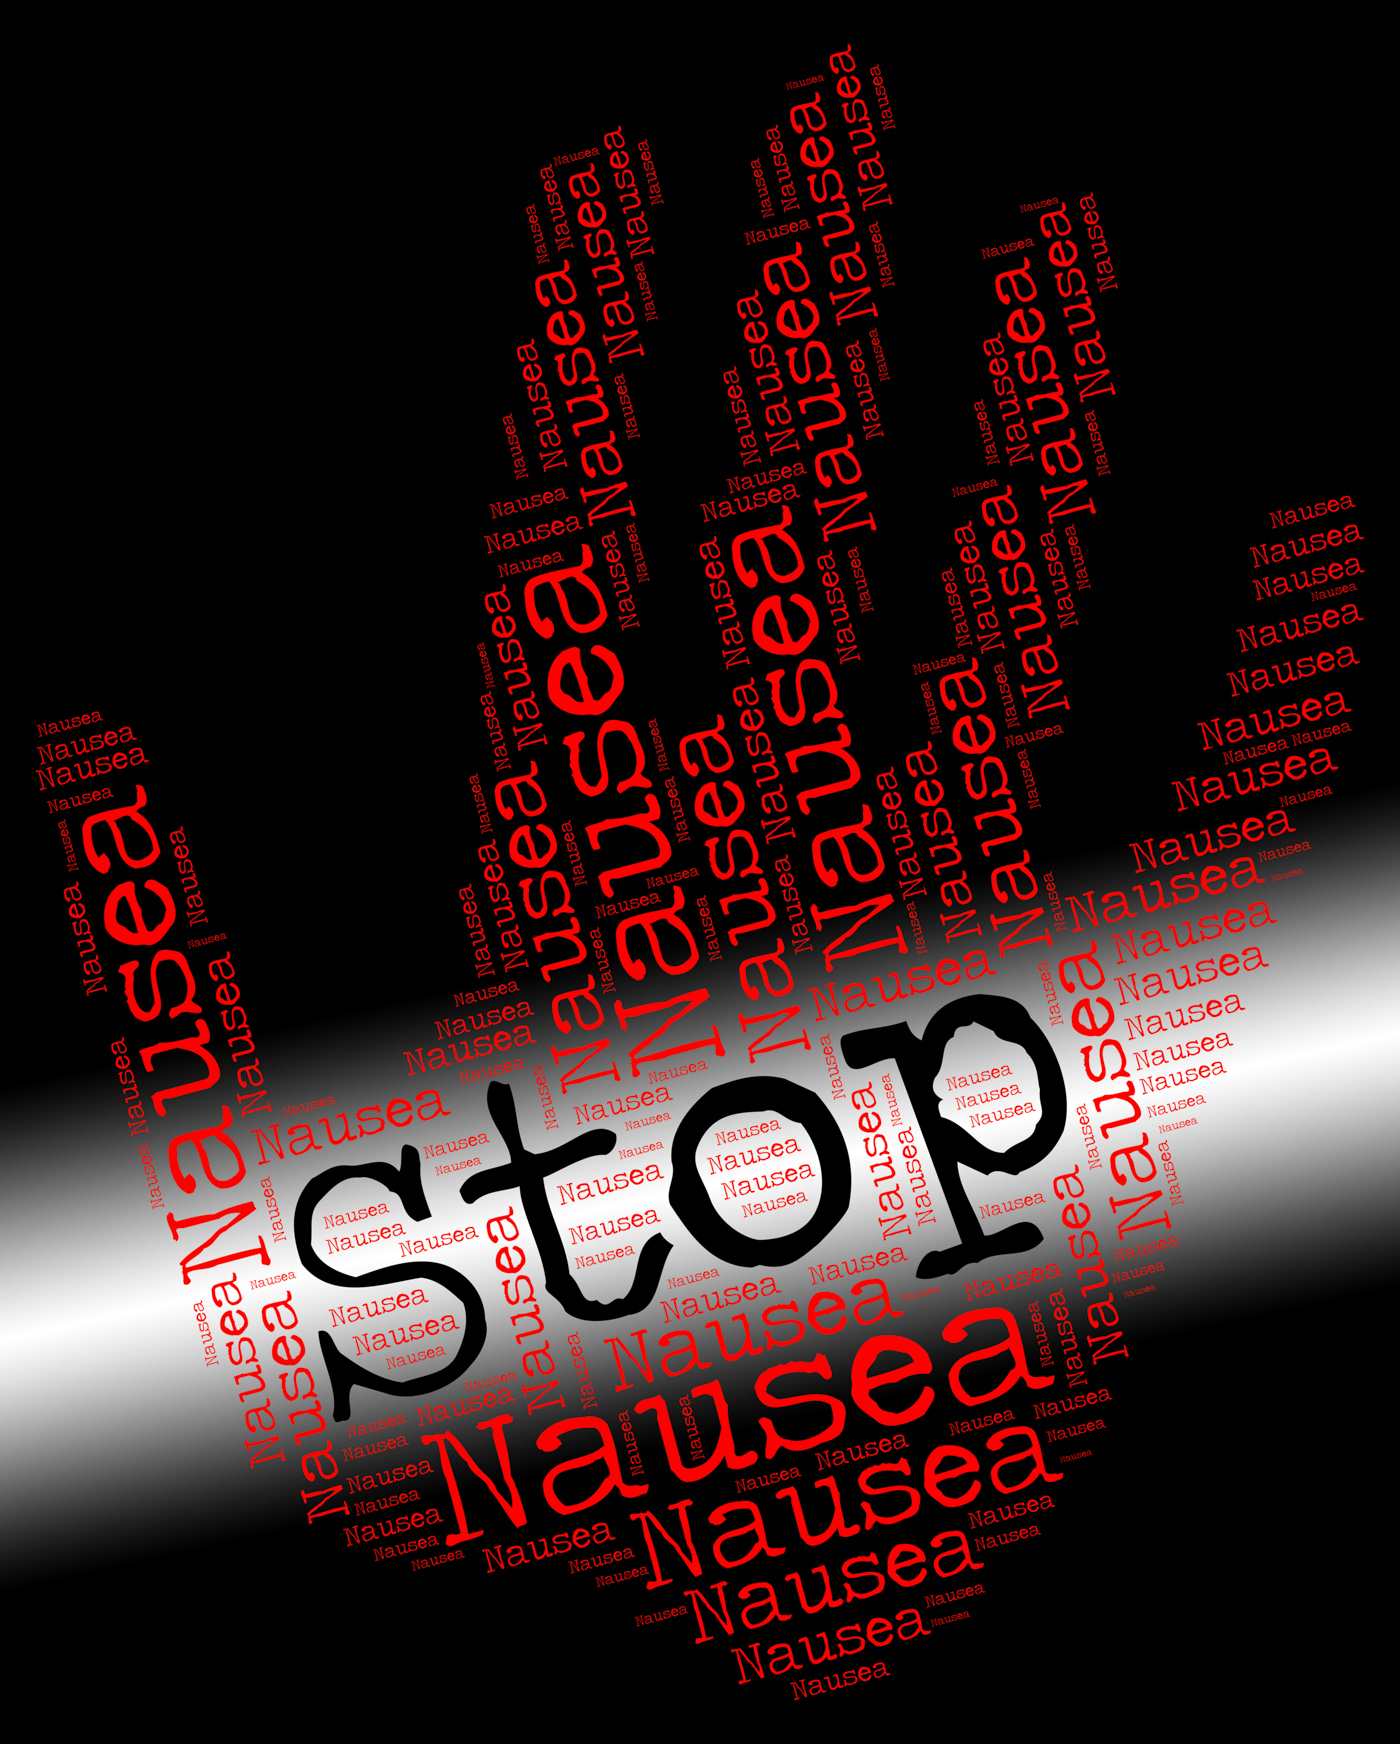 Stop nausea shows throw up and control photo